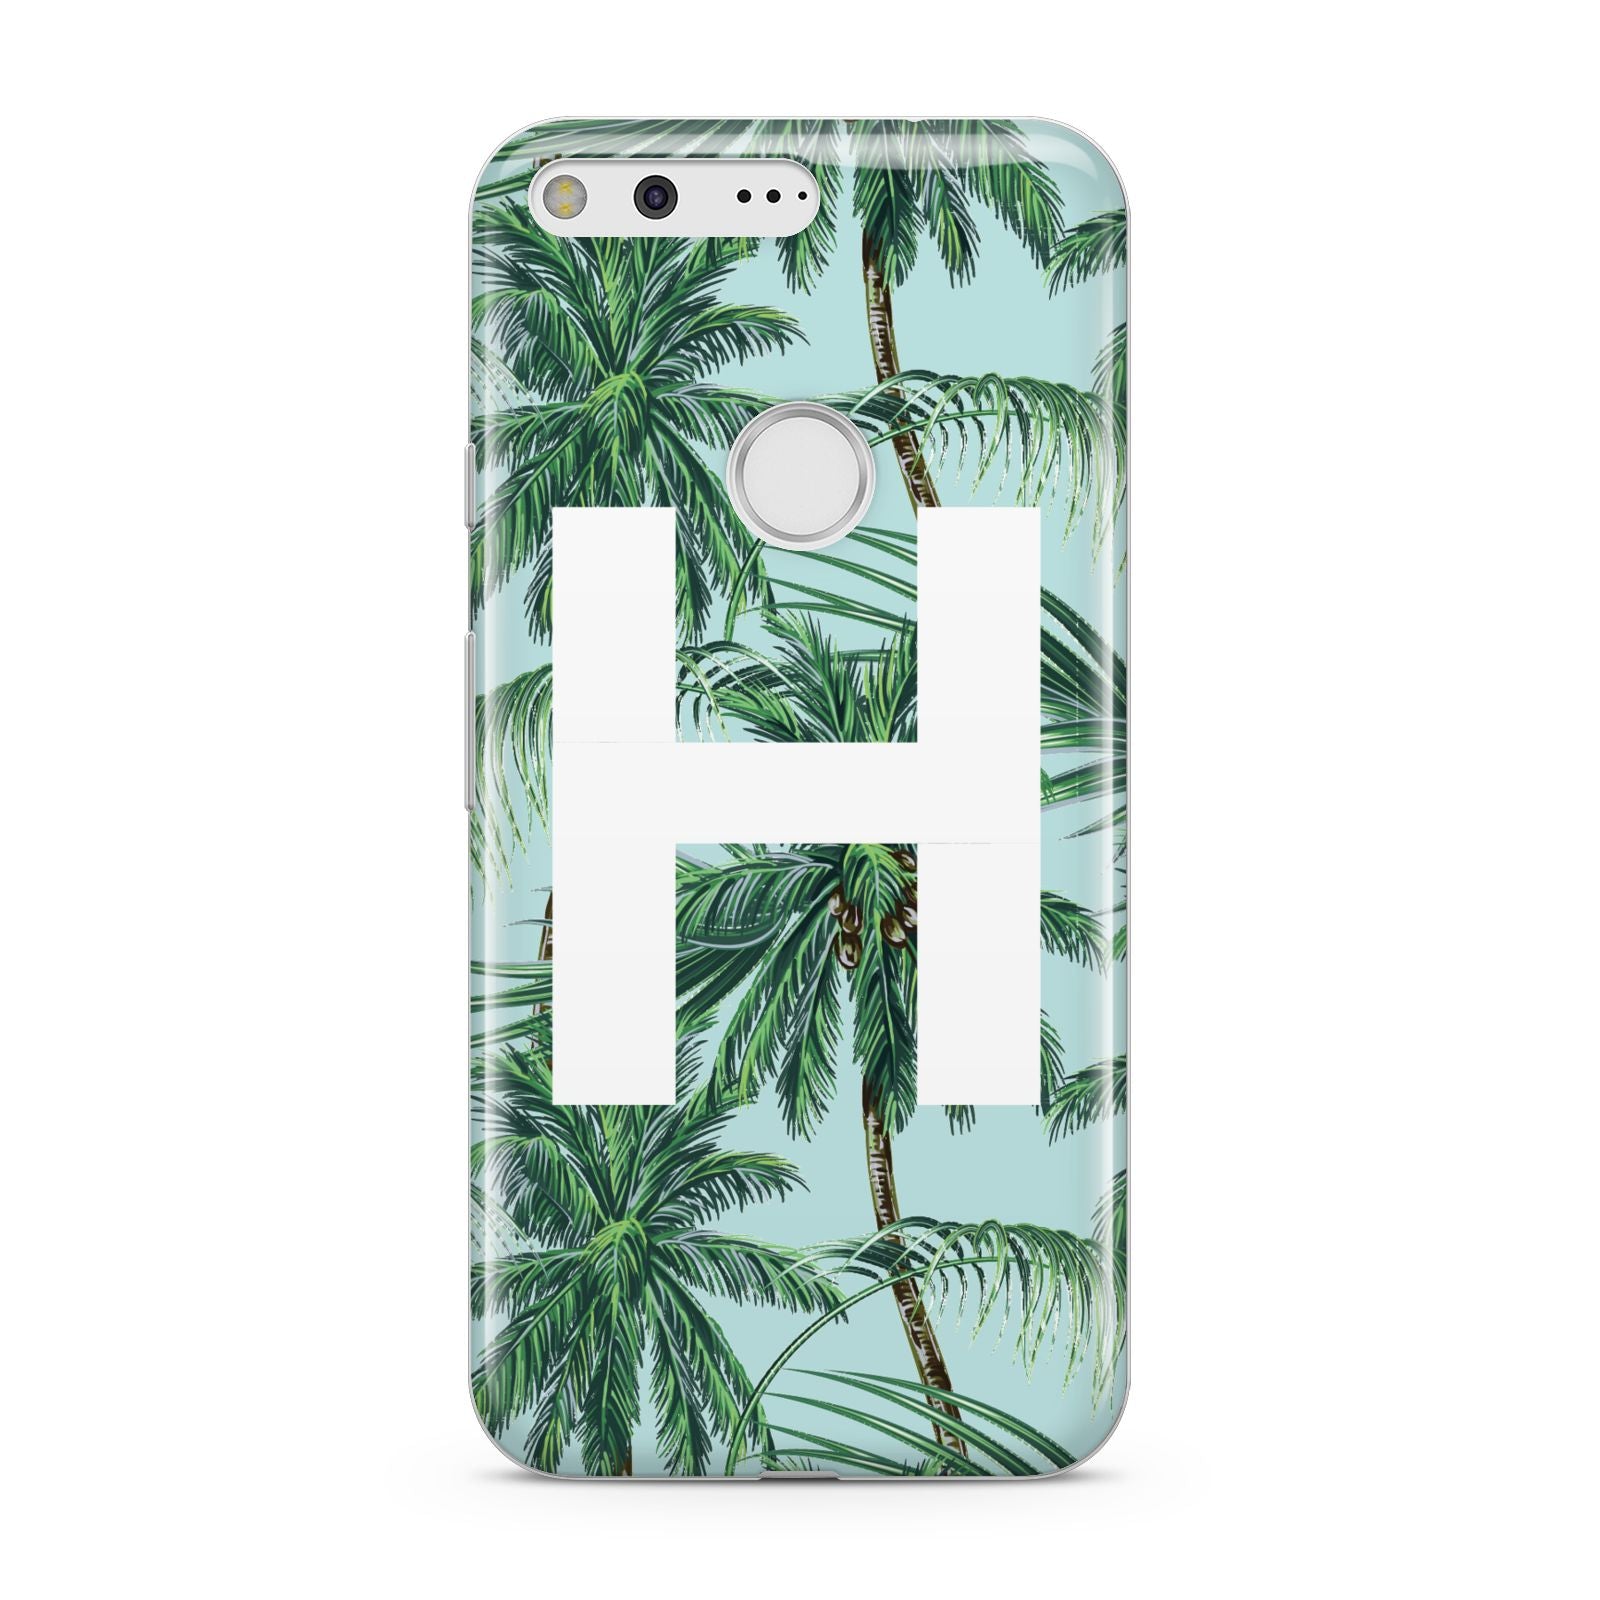 Personalised Palm Tree Tropical Google Pixel Case